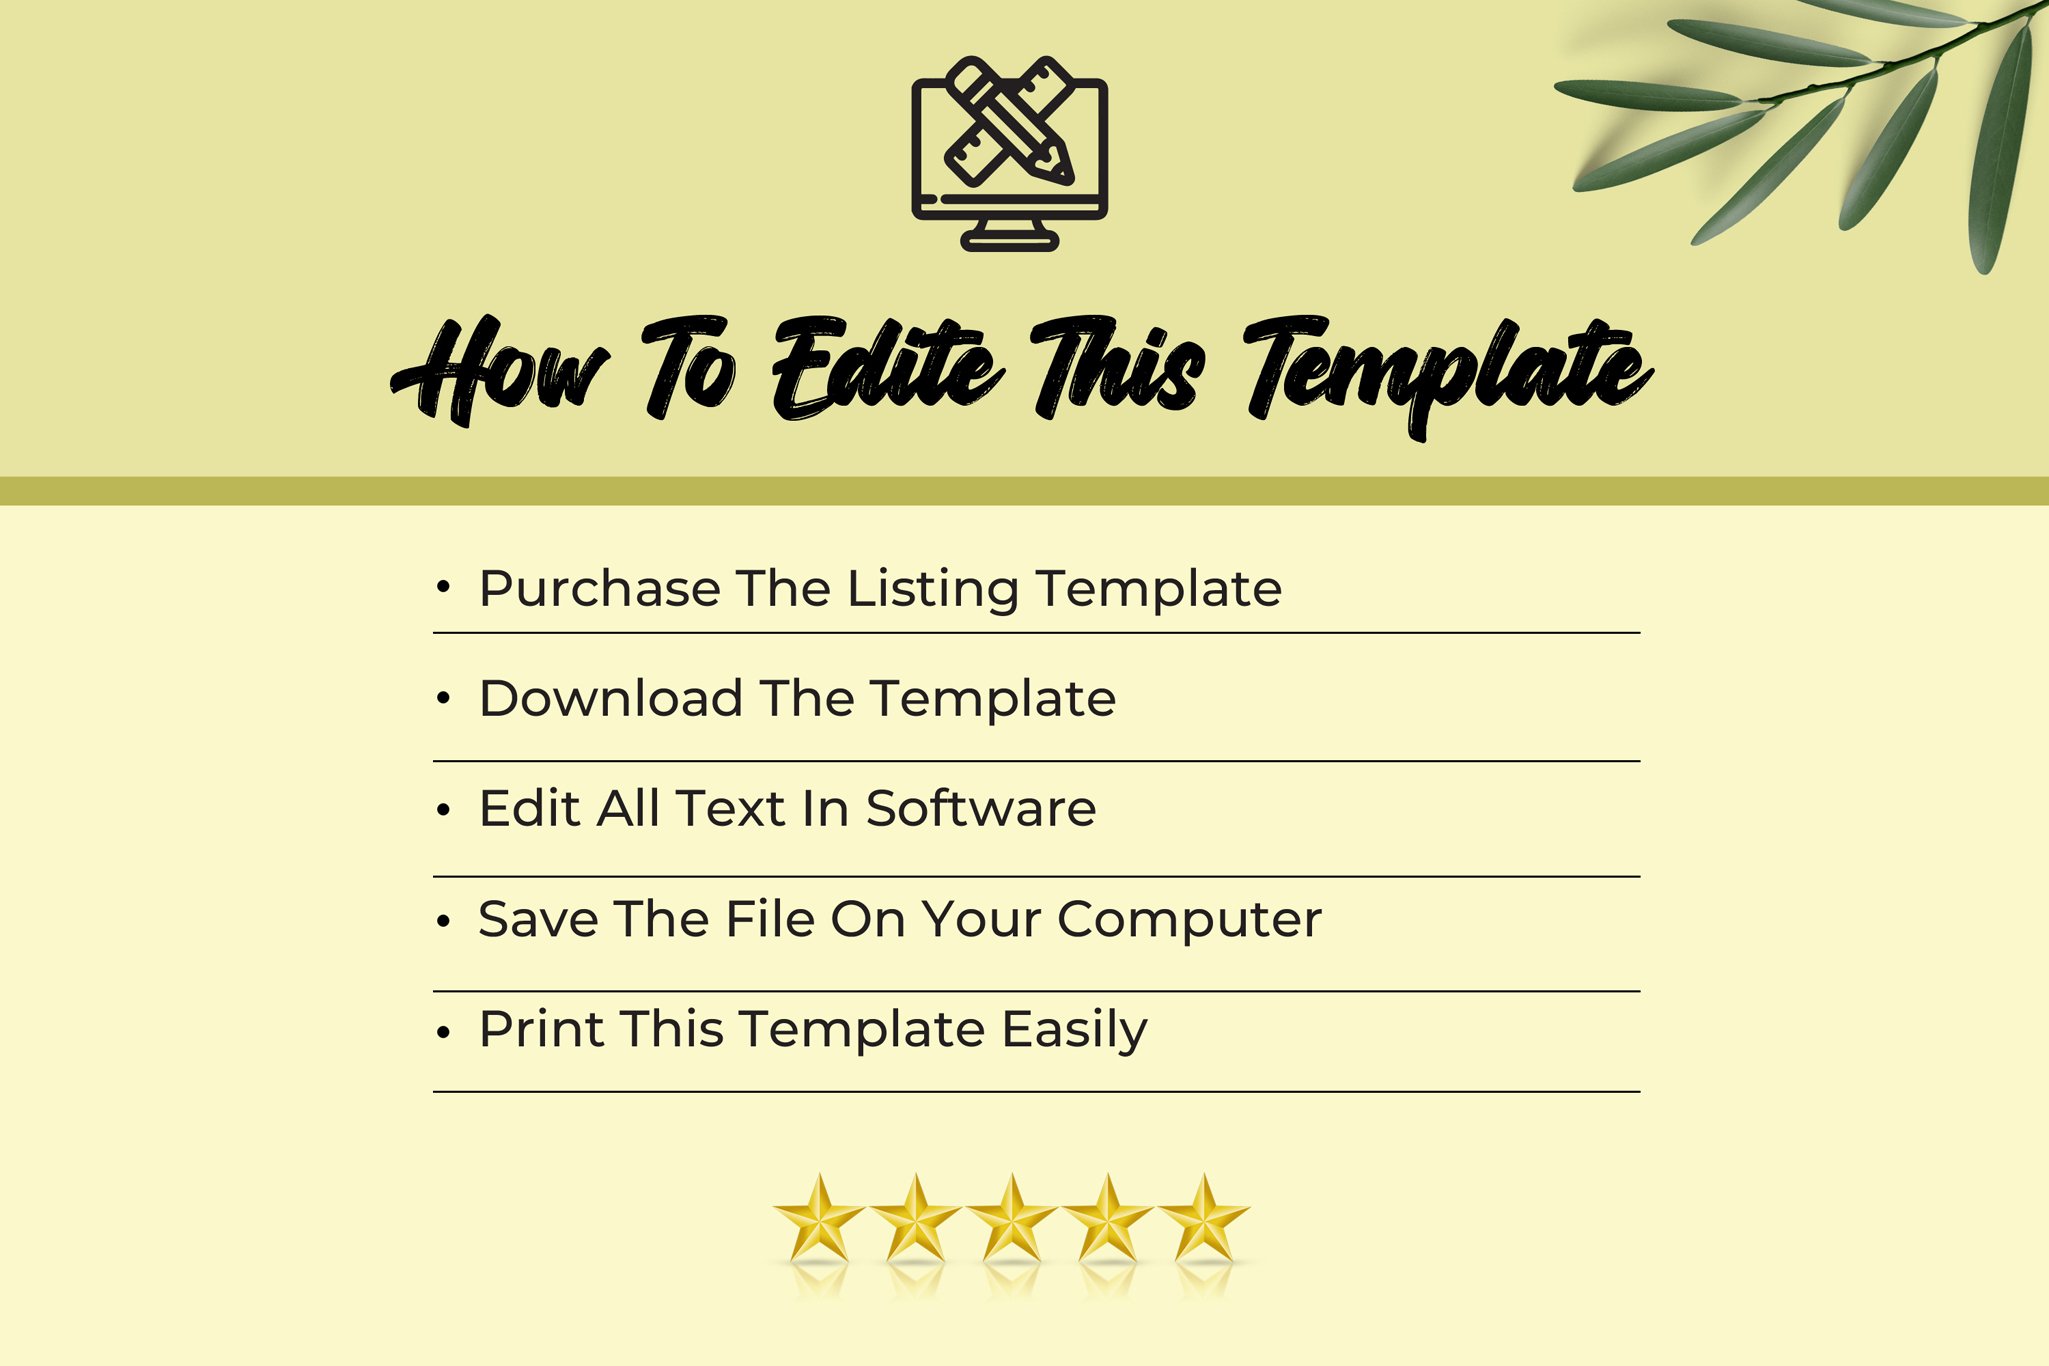 06 how to edite this template 659